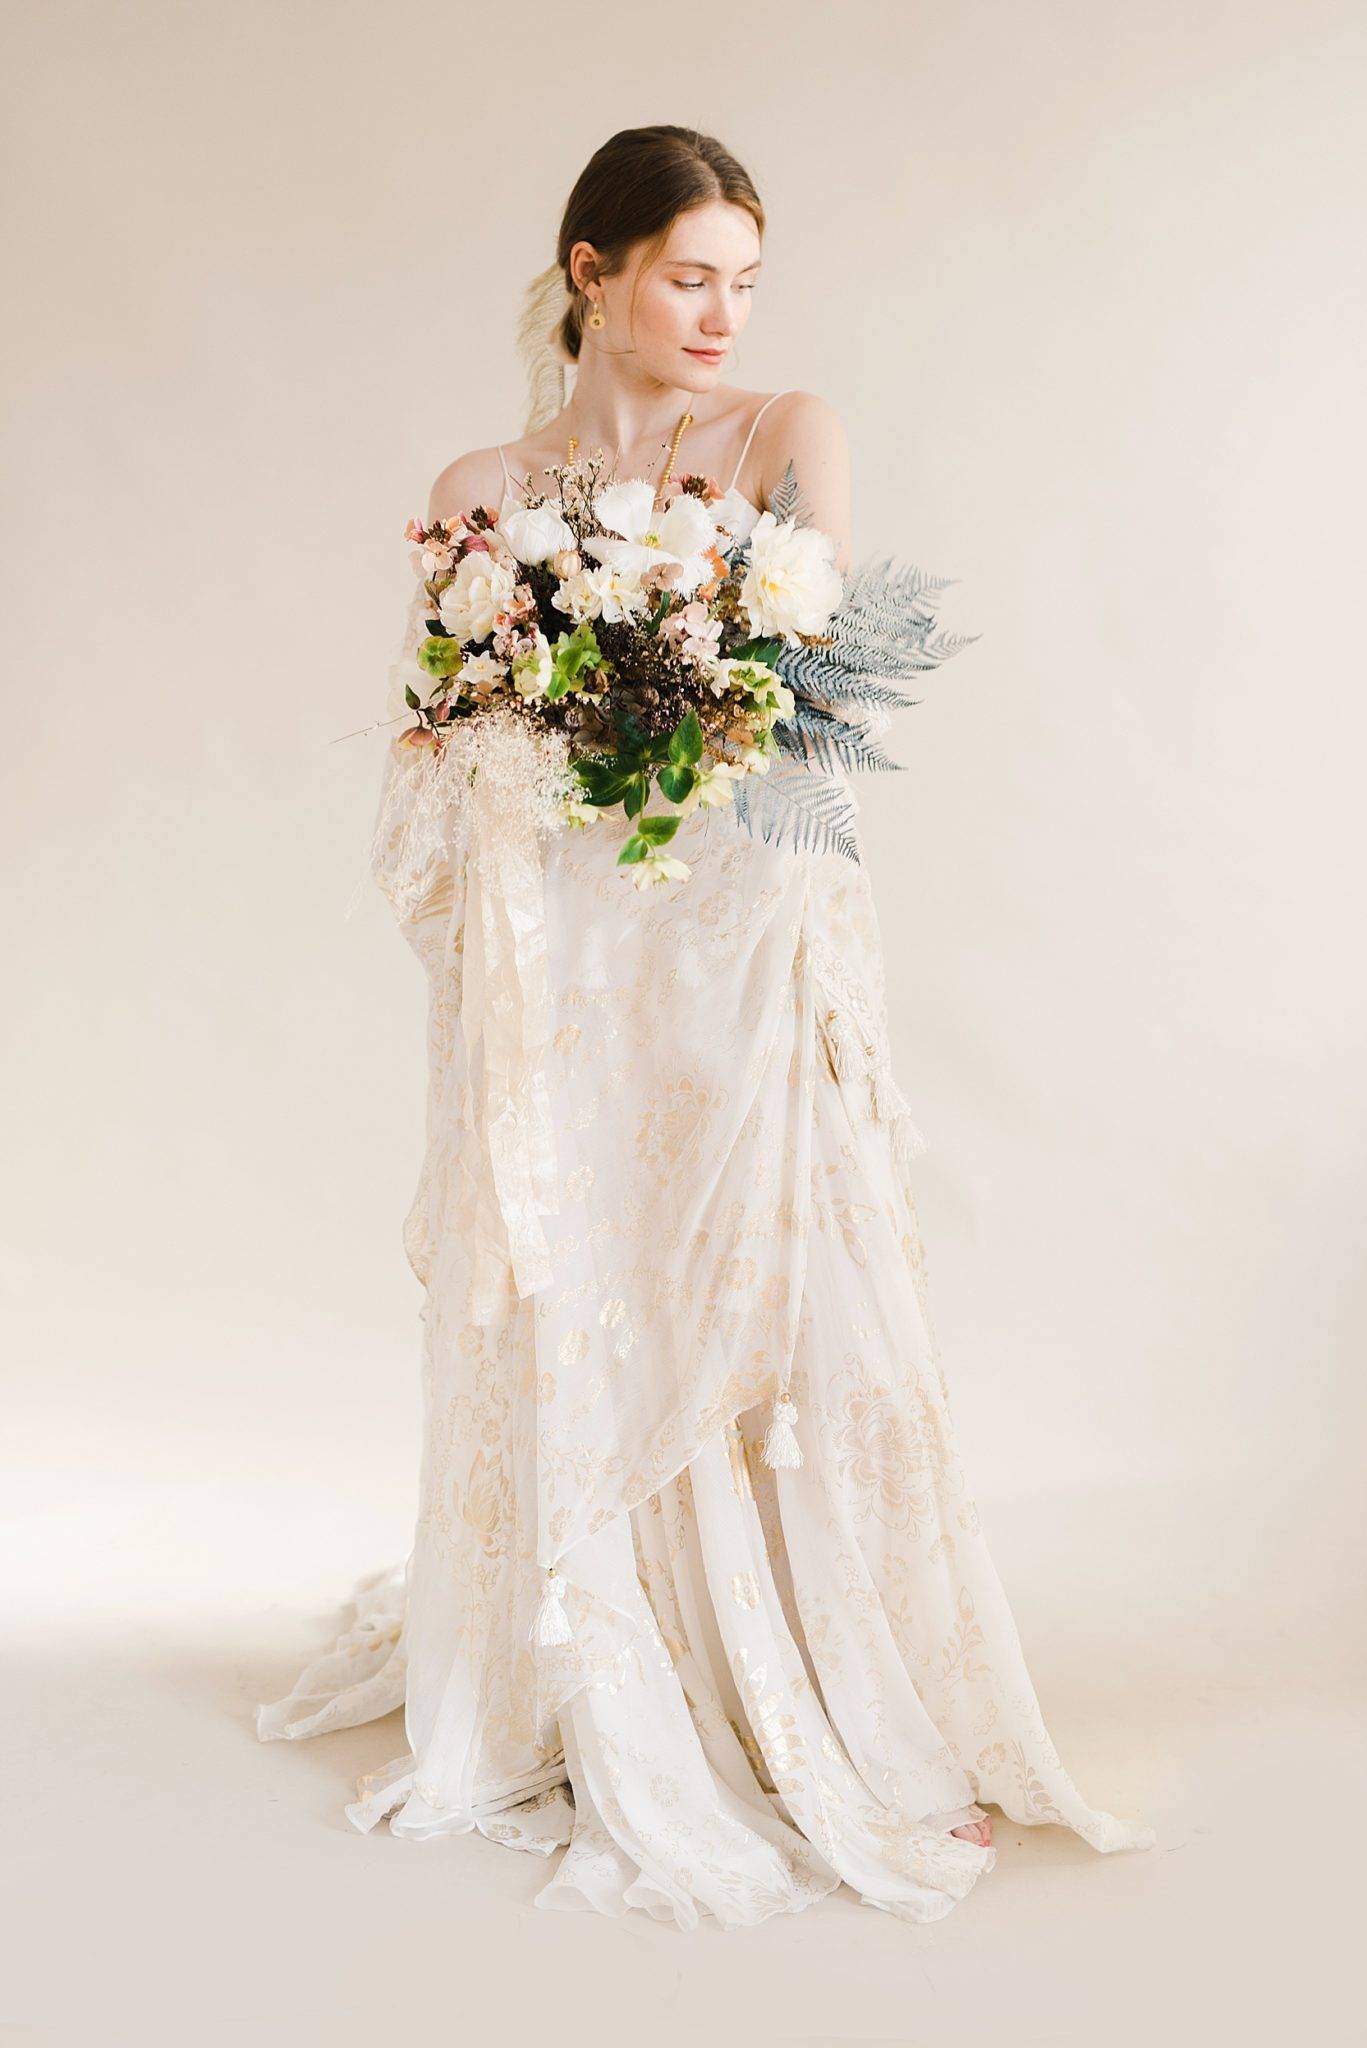 Luxury Wedding Editorial: Bride Facing to the Side Holding Bouquet